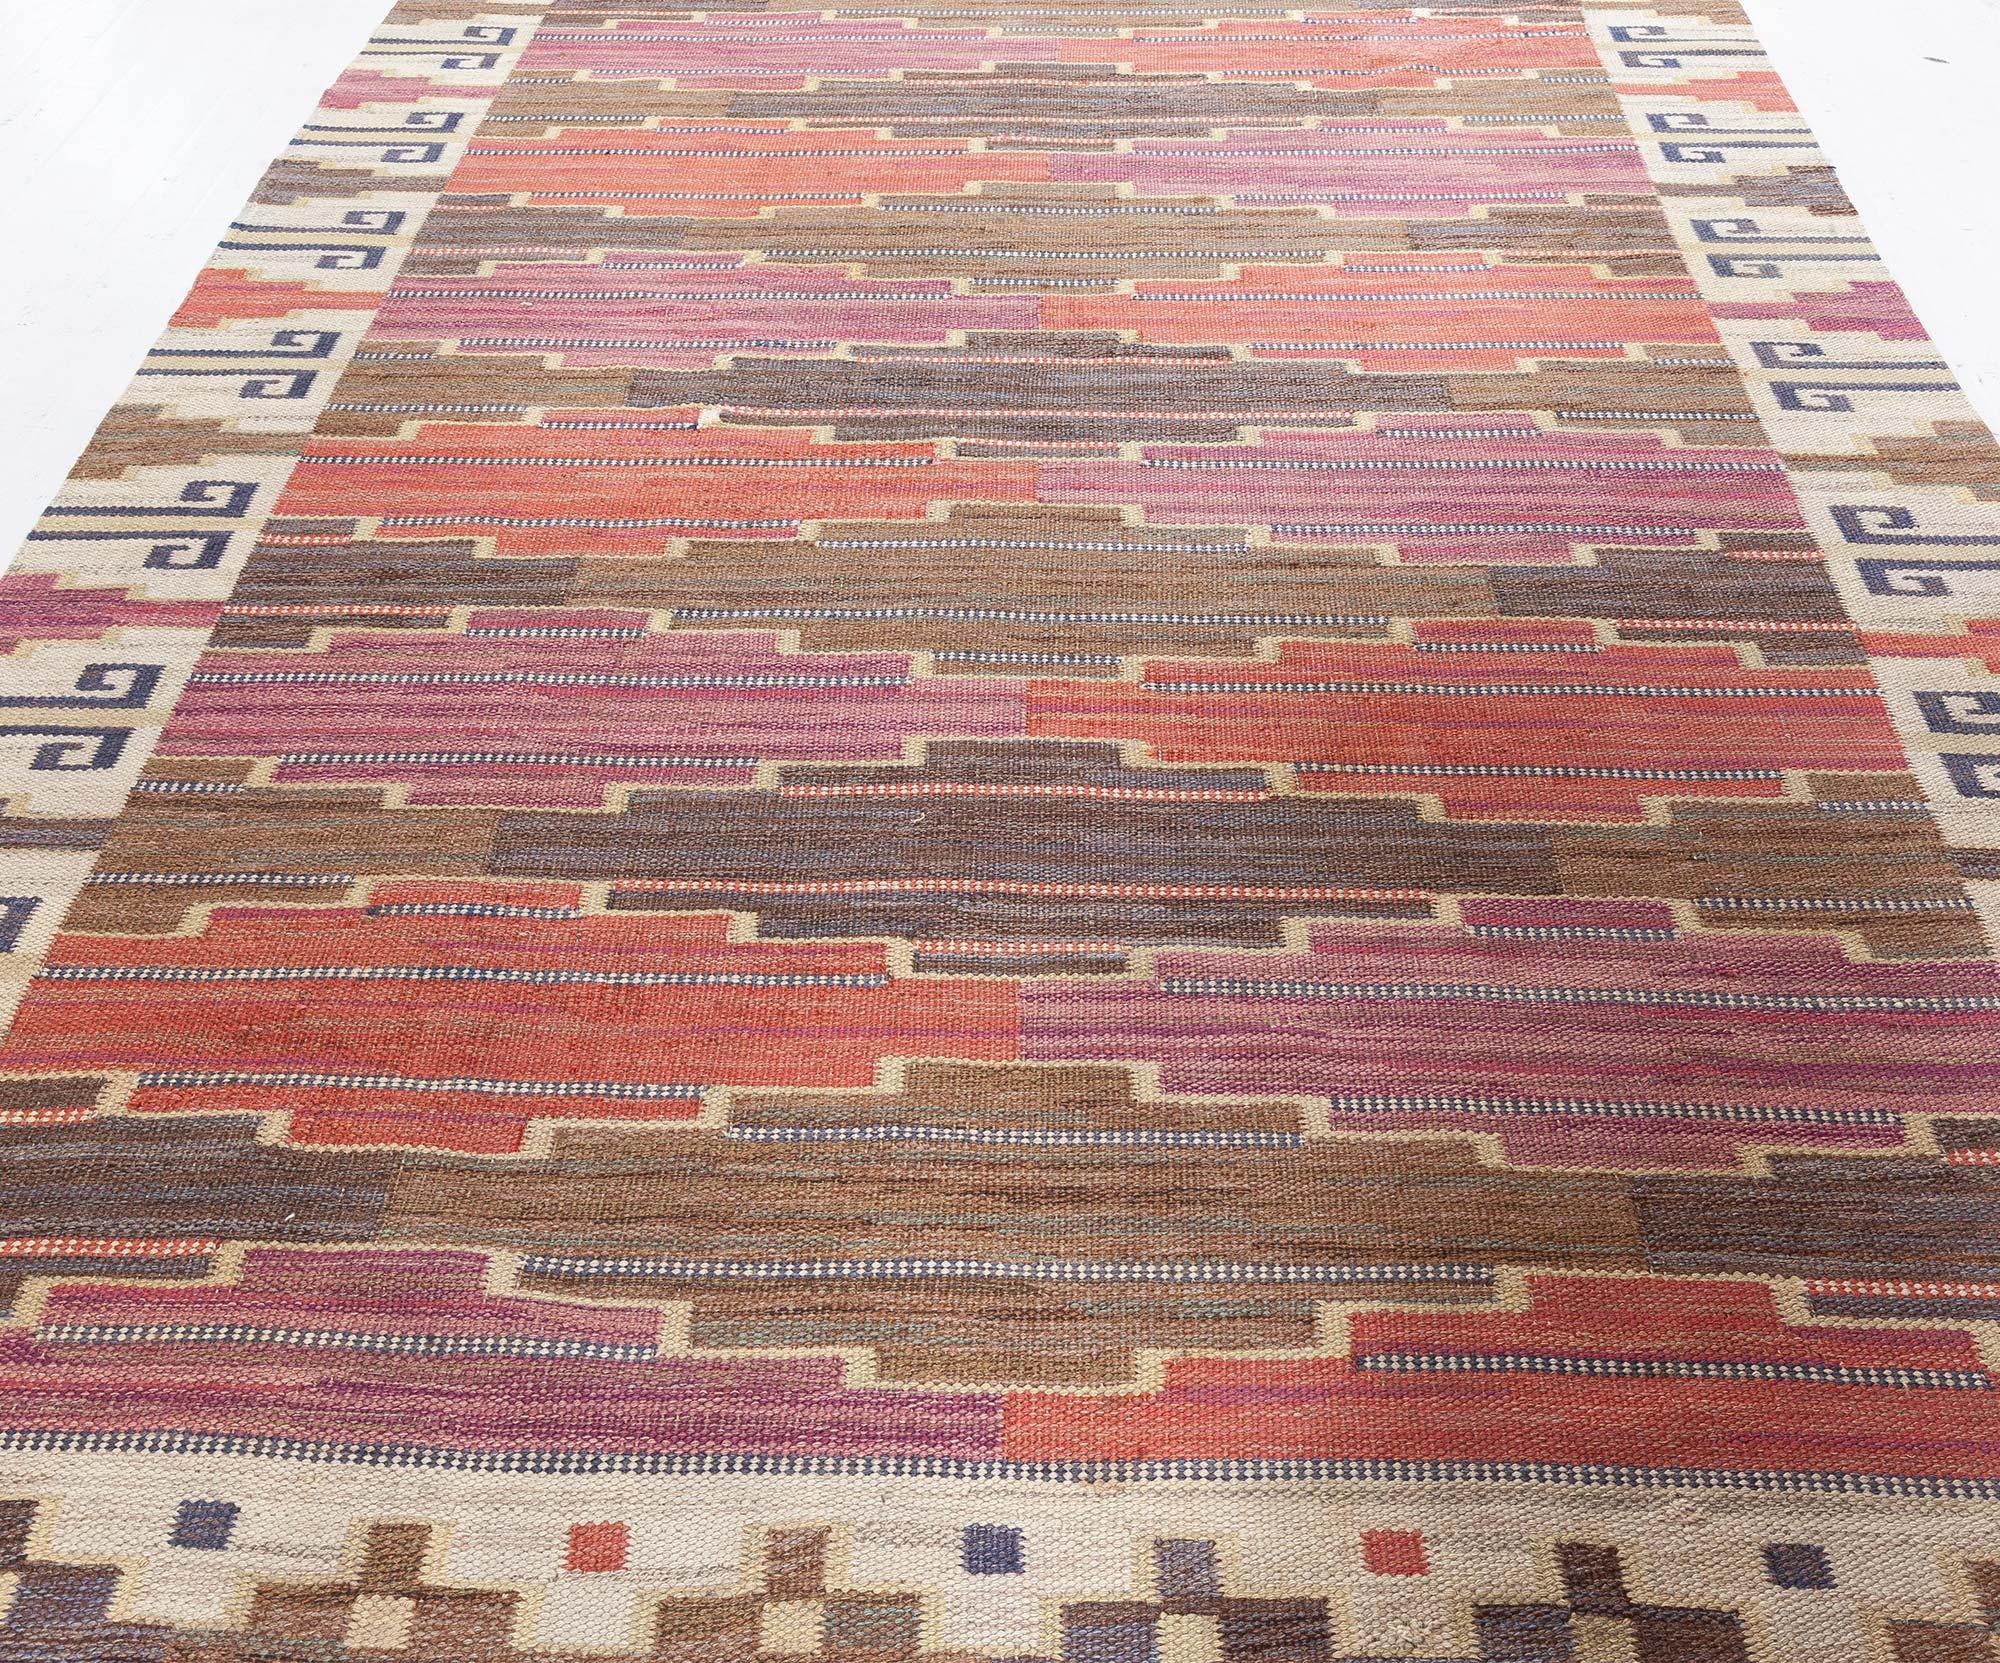 Hand-Woven Vintage Swedish Flat Woven Rug by Marta Maas Fjetterstrom